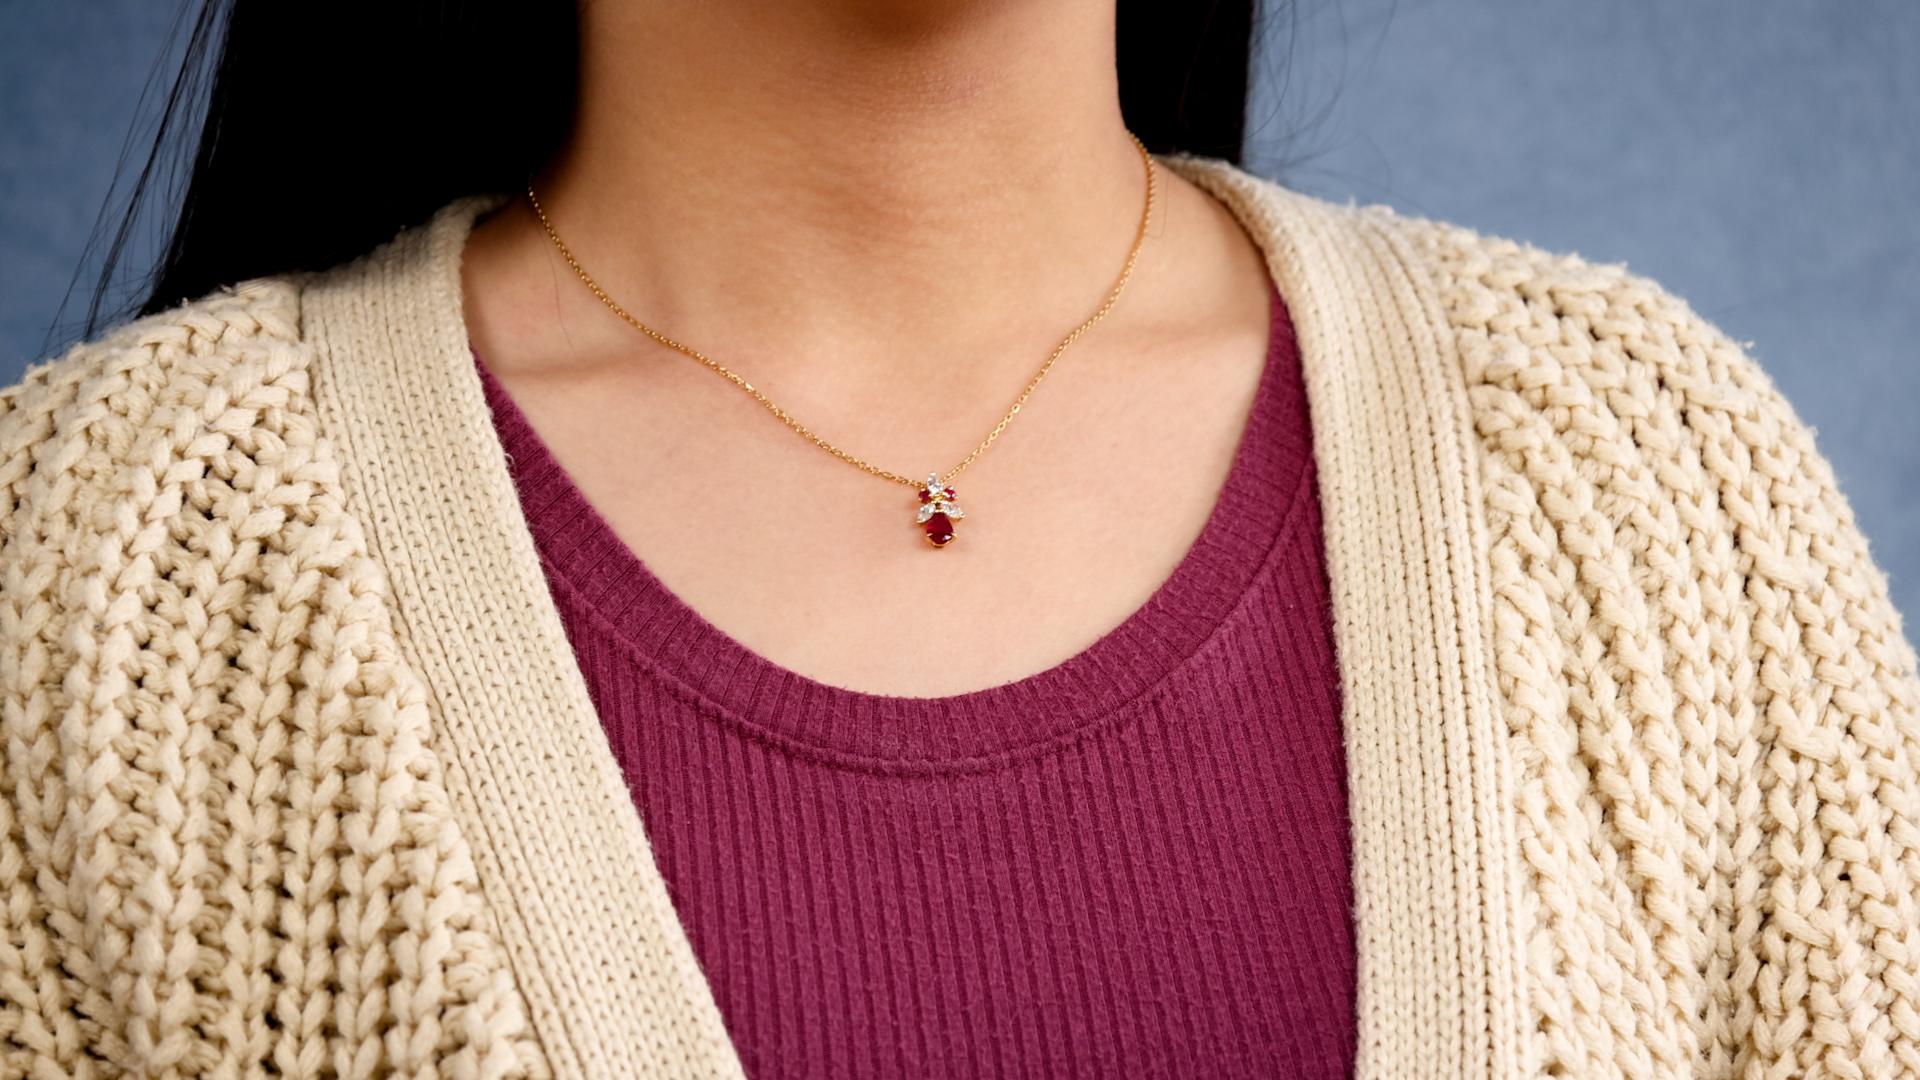 One Vintage Ruby Diamond 18k Yellow Gold Pendant Necklace. Featuring one pear mixed cut ruby weighing approximately 0.60 carat. Accented by three marquise cut diamonds with a total weight of approximately 0.25 carat, graded I-J color, VS clarity and